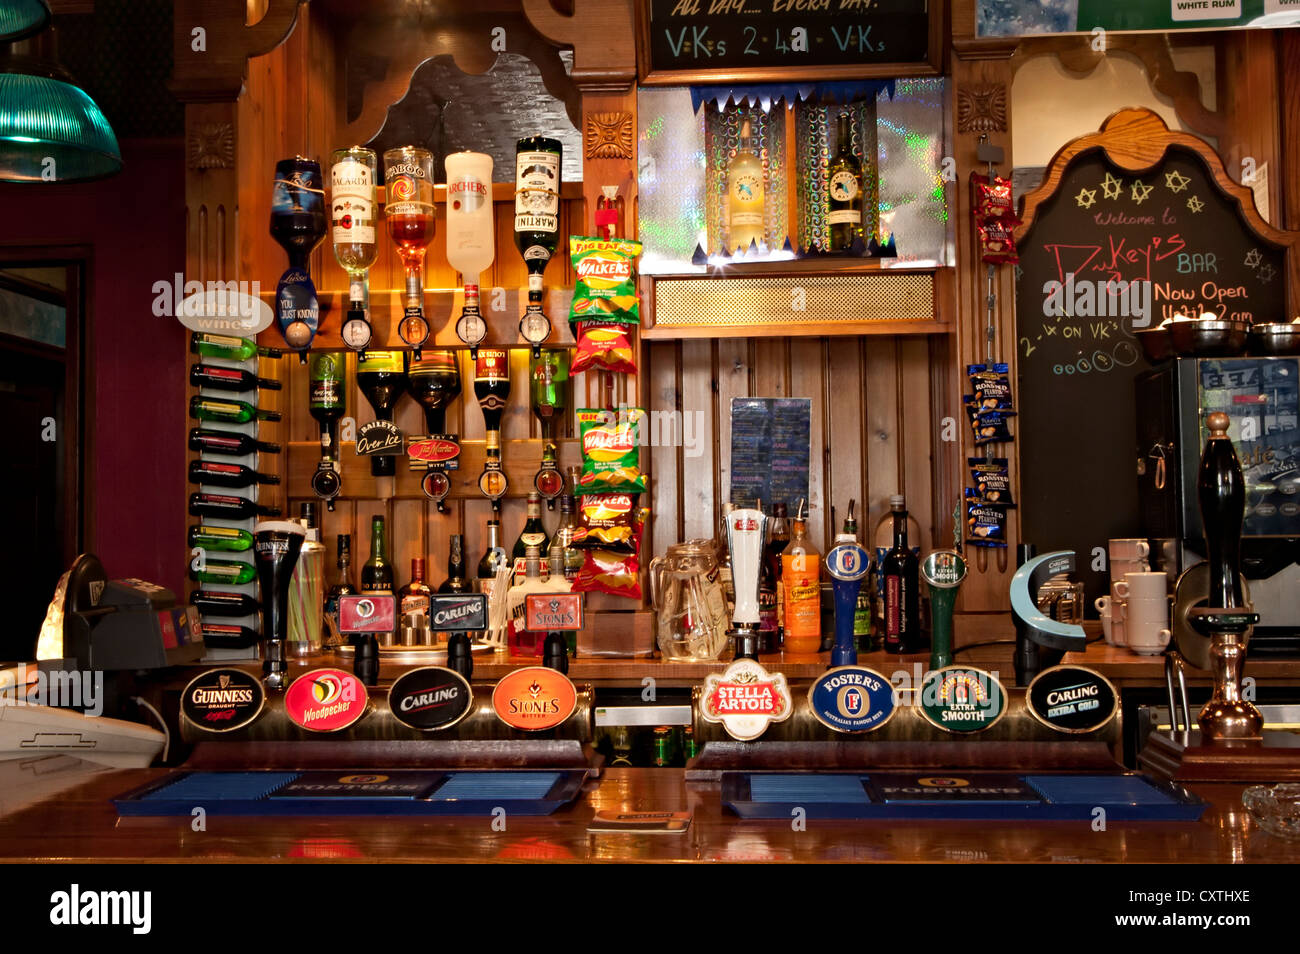 the Strafford pub Guinness bar beer pumps Stock Photo